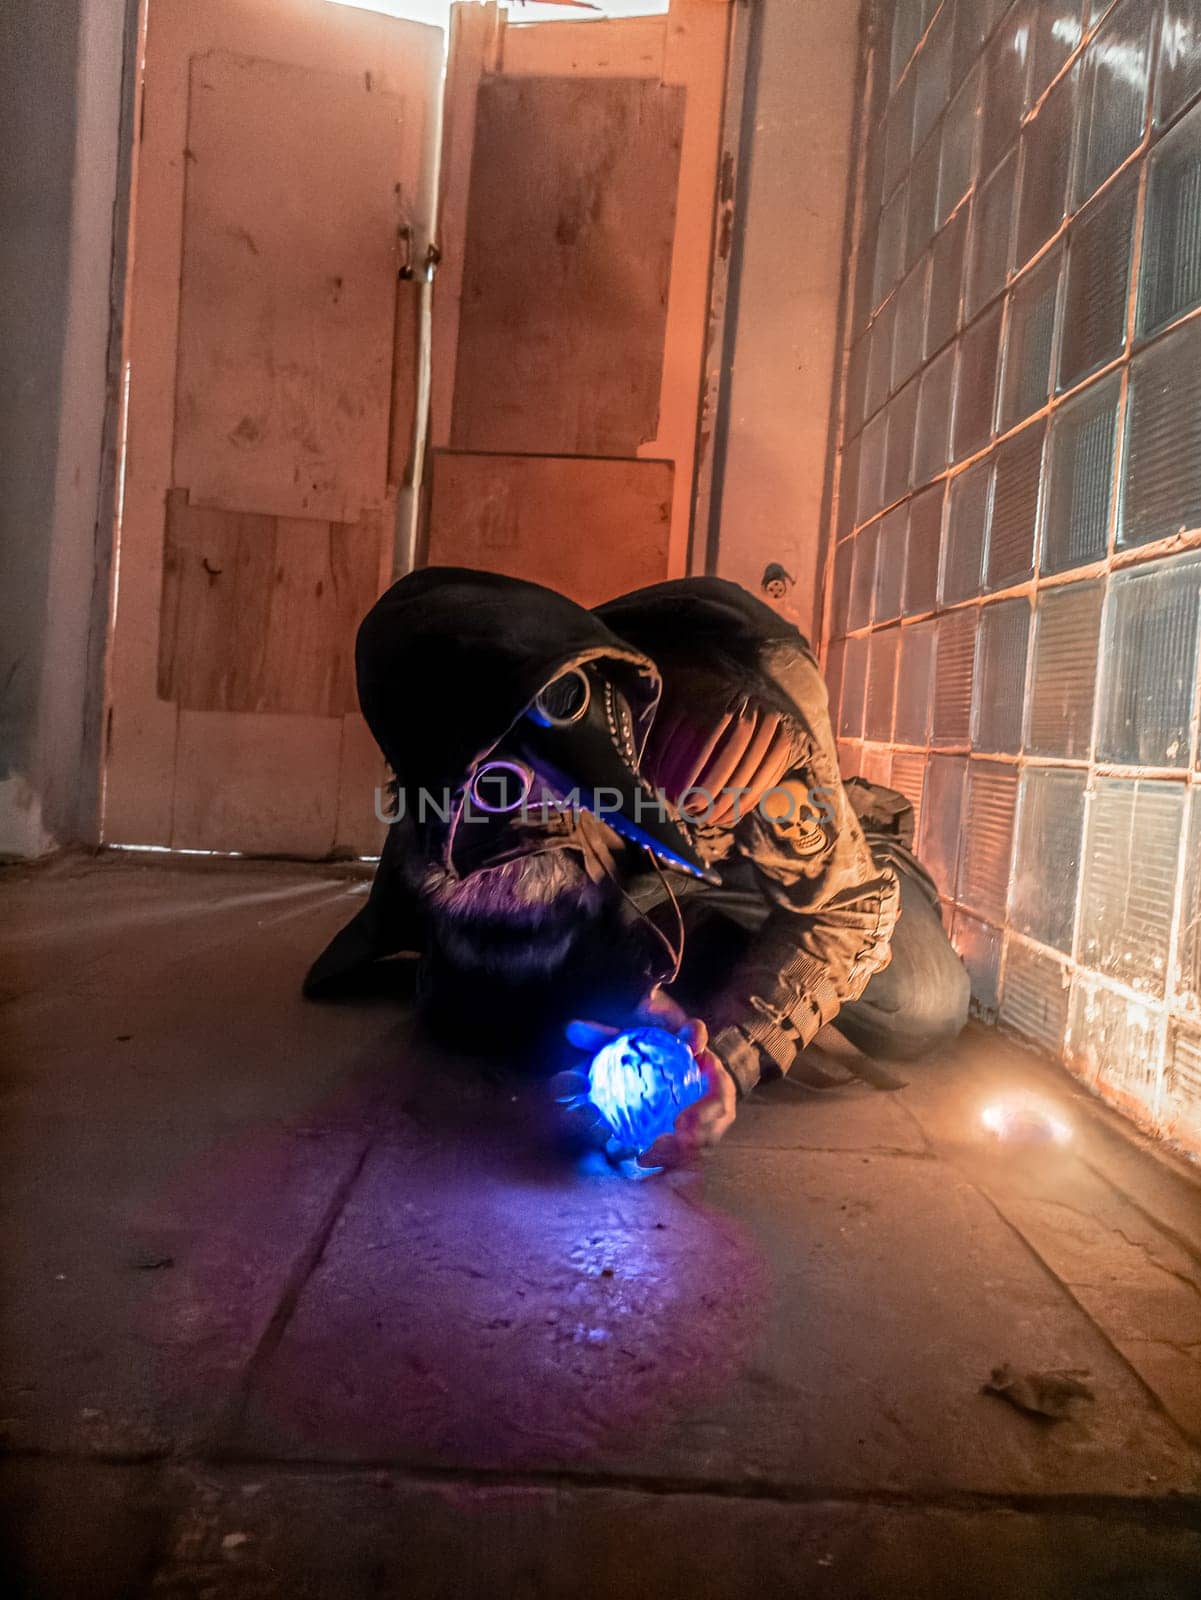 Cosplay of a stalker lying on the floor of an abandoned house in a plague doctor mask and holding a mysterious artifact. art photography by lempro